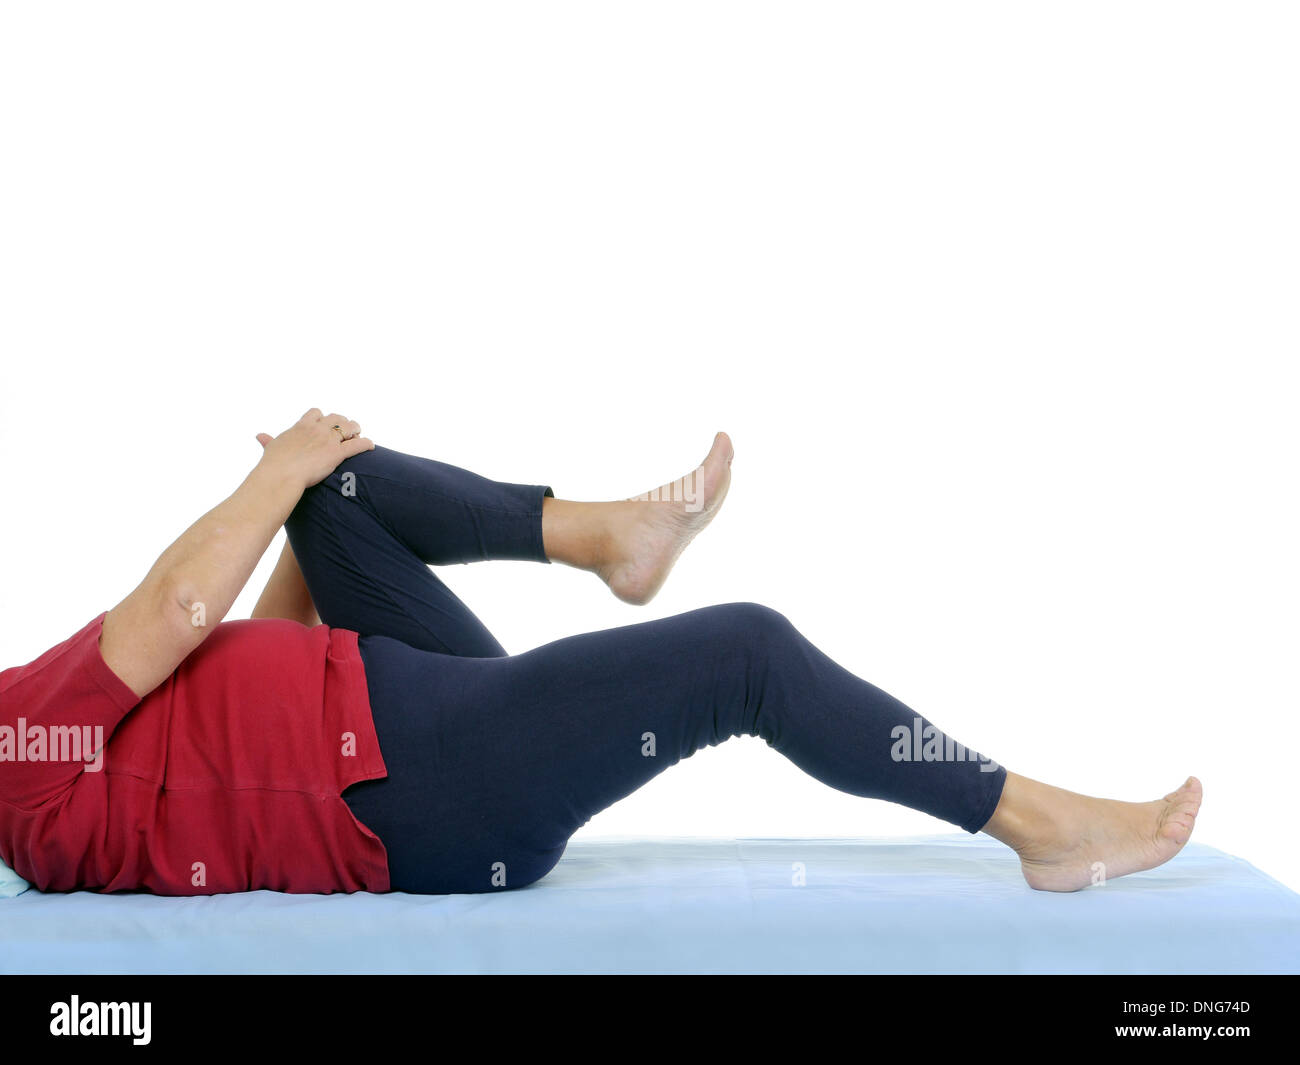 Older patient performing functional test of hip joint contraction lying on bed Stock Photo